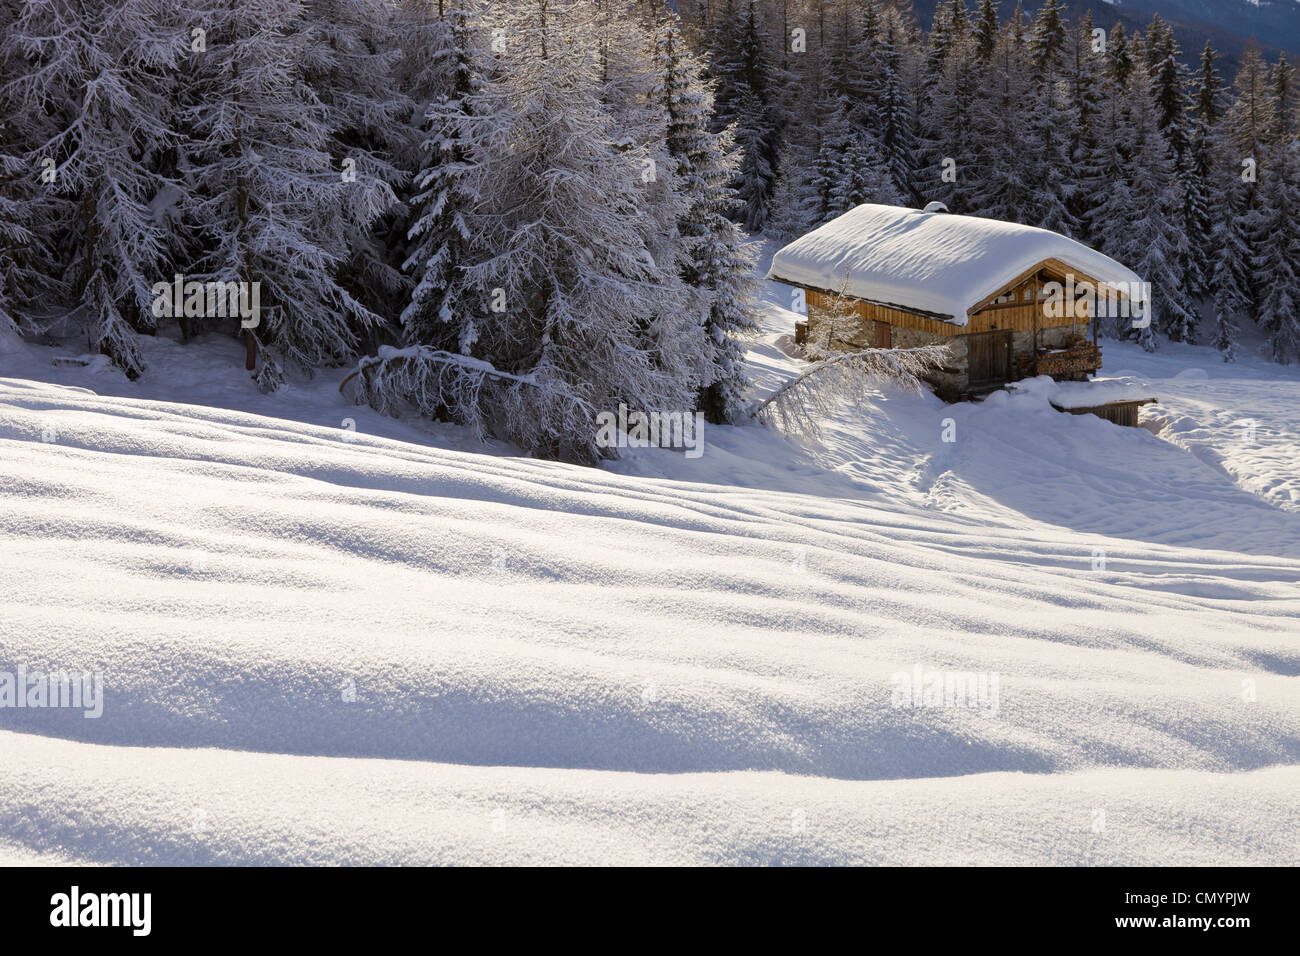 France, Savoie, Les Arcs 1800, Massif de La Vanoise, high Tarentaise valley, chalet isolated in the forest Stock Photo